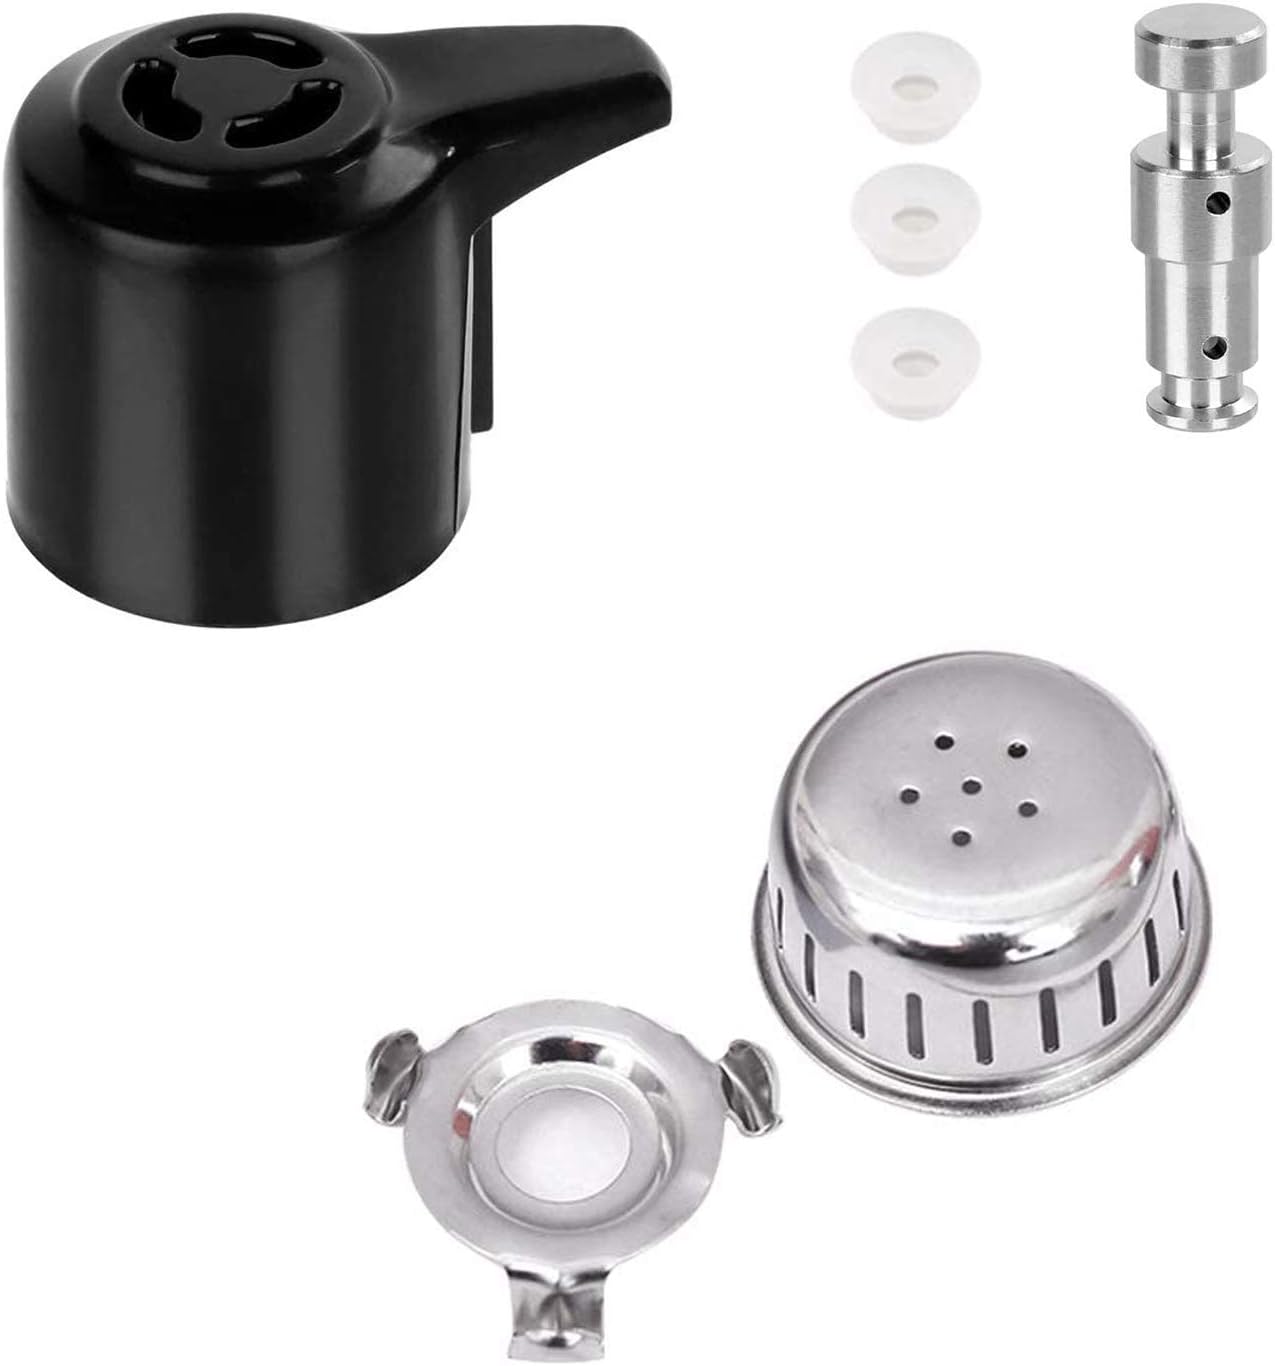 Generic iSH09-M673119mn Steam Release Handle,Original Float Valve  Replacement Parts with 3 Silicone Caps for Instant Pot Duo 3, 5, 6 and 8  Quart,Duo Pl